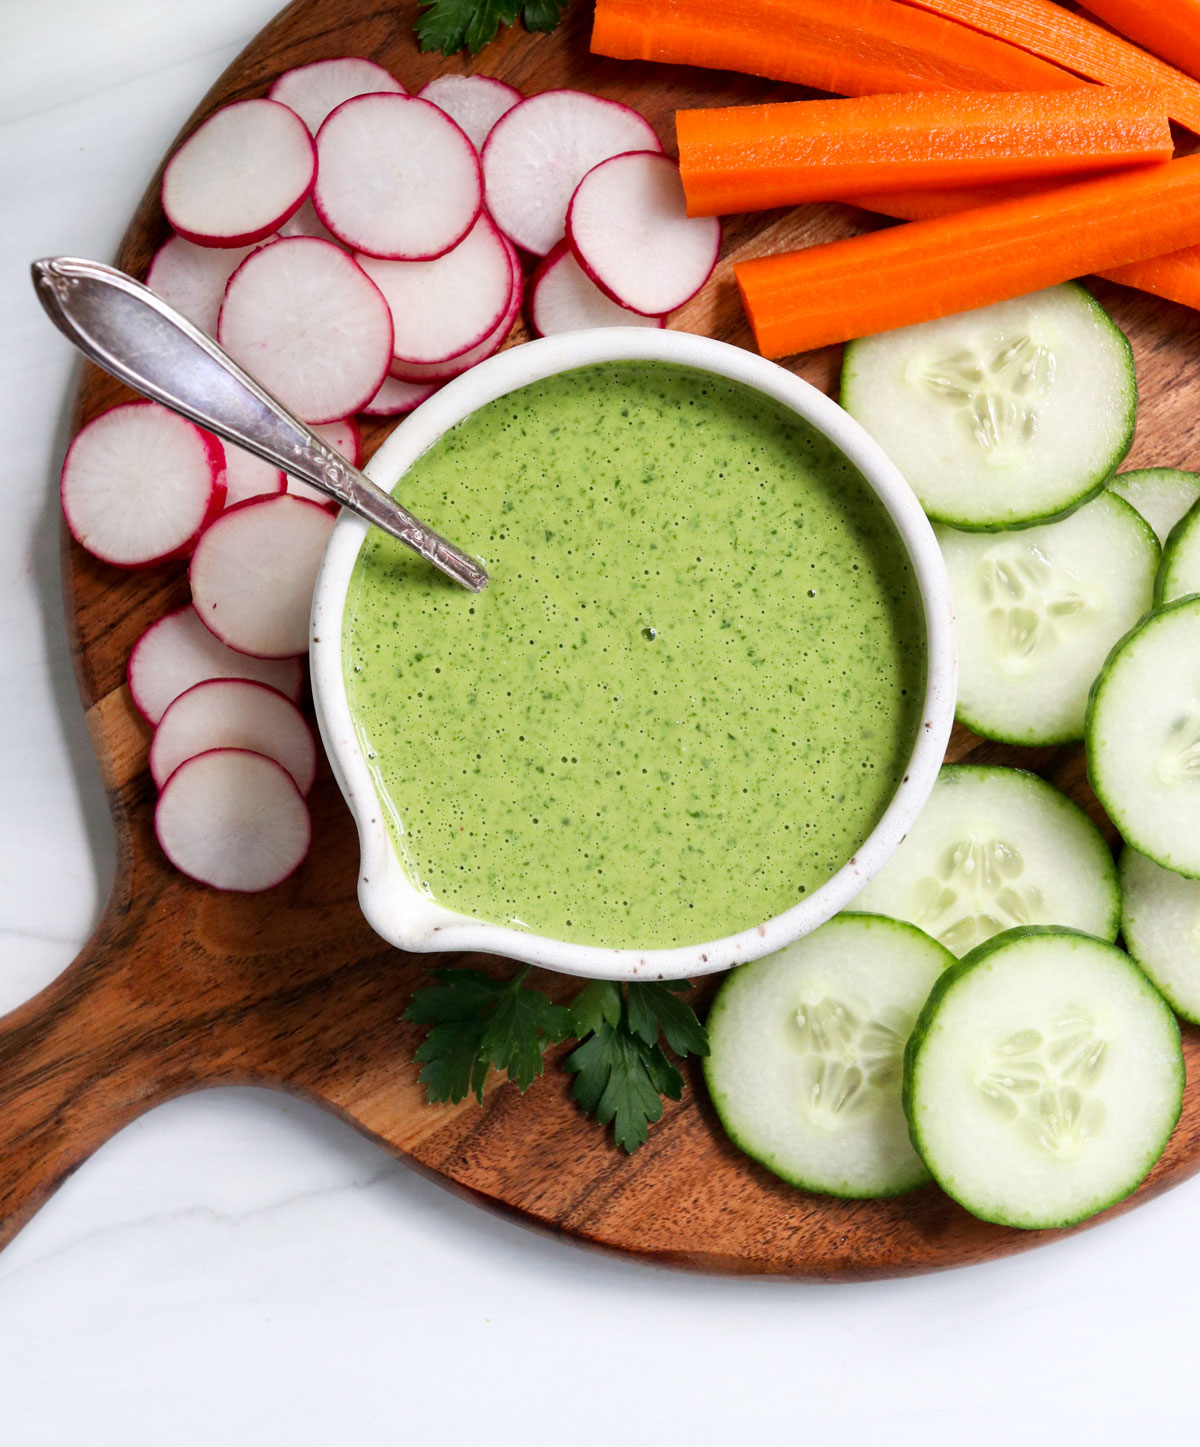 green goddess dressing served on a tray of veggies.